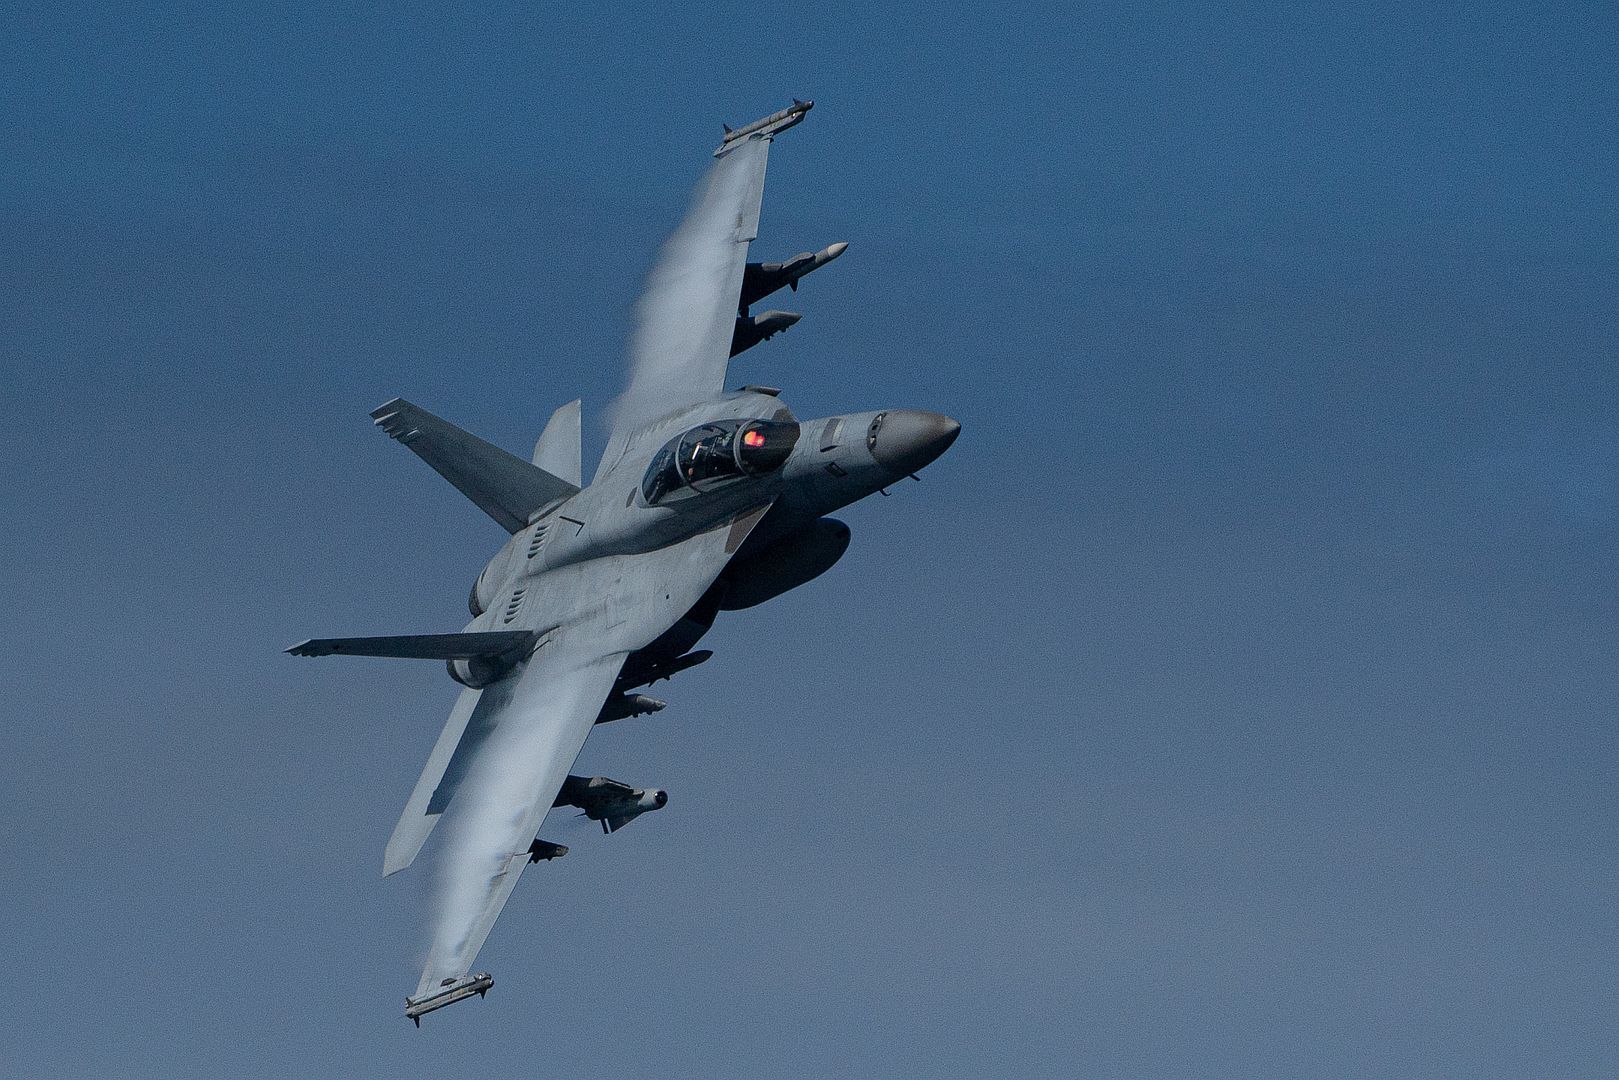 FA 18F Super Hornet Assigned To The Diamondbacks Of Strike Fighter Squadron VFA 102 Flies Past The Arleigh Burke Class Guided Missile Destroyer USS Halsey